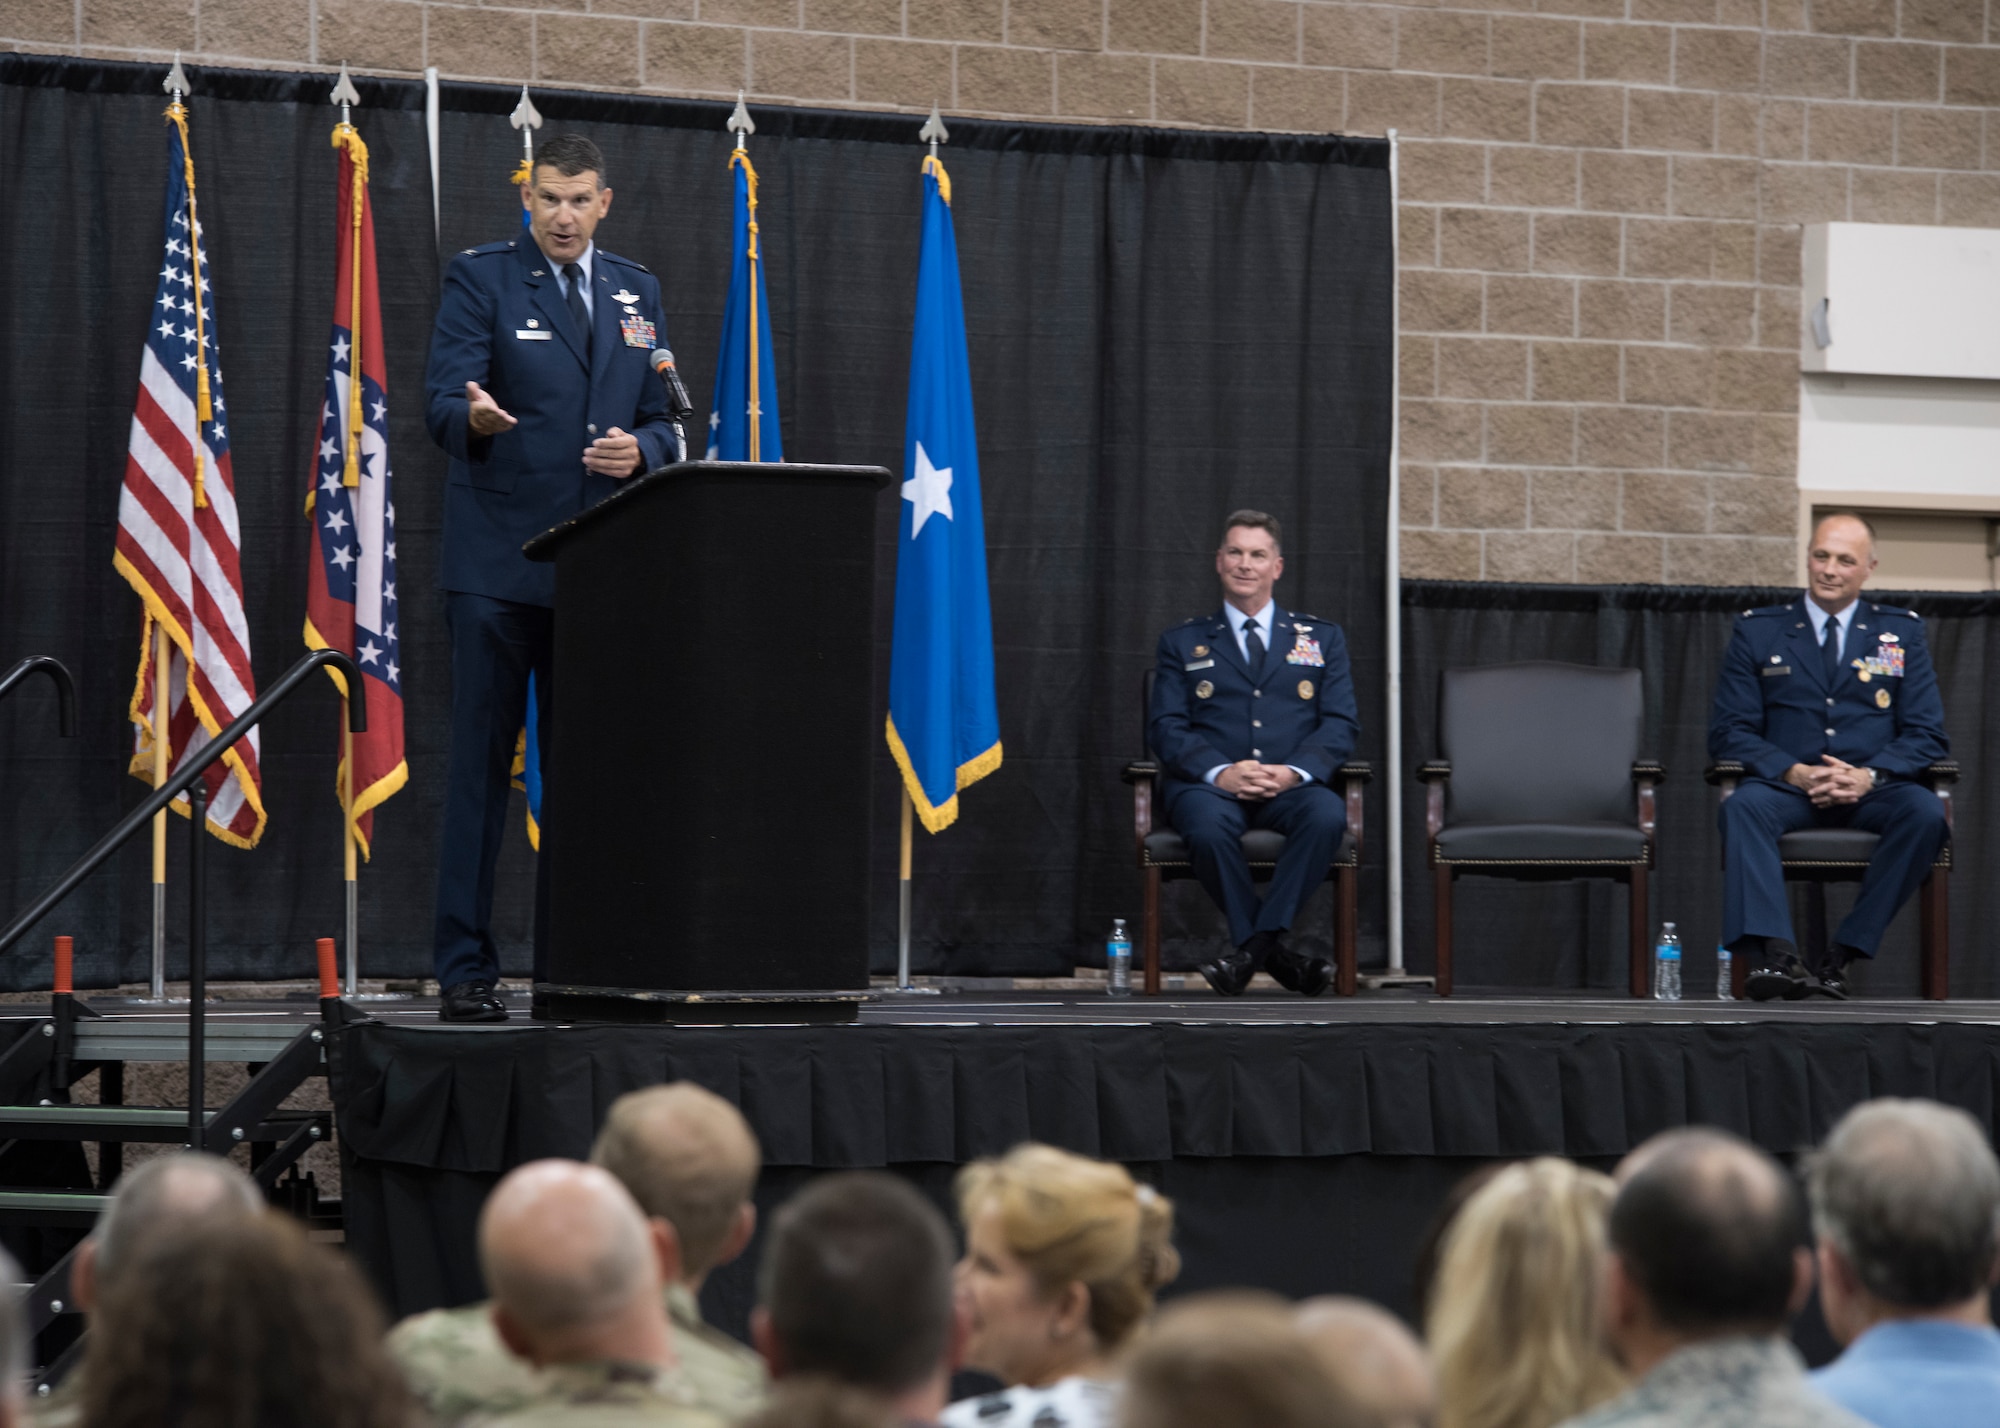 Col. Leon J. Dodroe, 188th Wing commander, address members of the wing after assuming command during a ceremony at Fort Smith, Ark., Aug. 11, 2019. Dodroe assumed command from Col. Robert I. Kinney who has led the unit since 2017. (U.S. Air National Guard photo by Tech. Sgt. Daniel J. Condit)